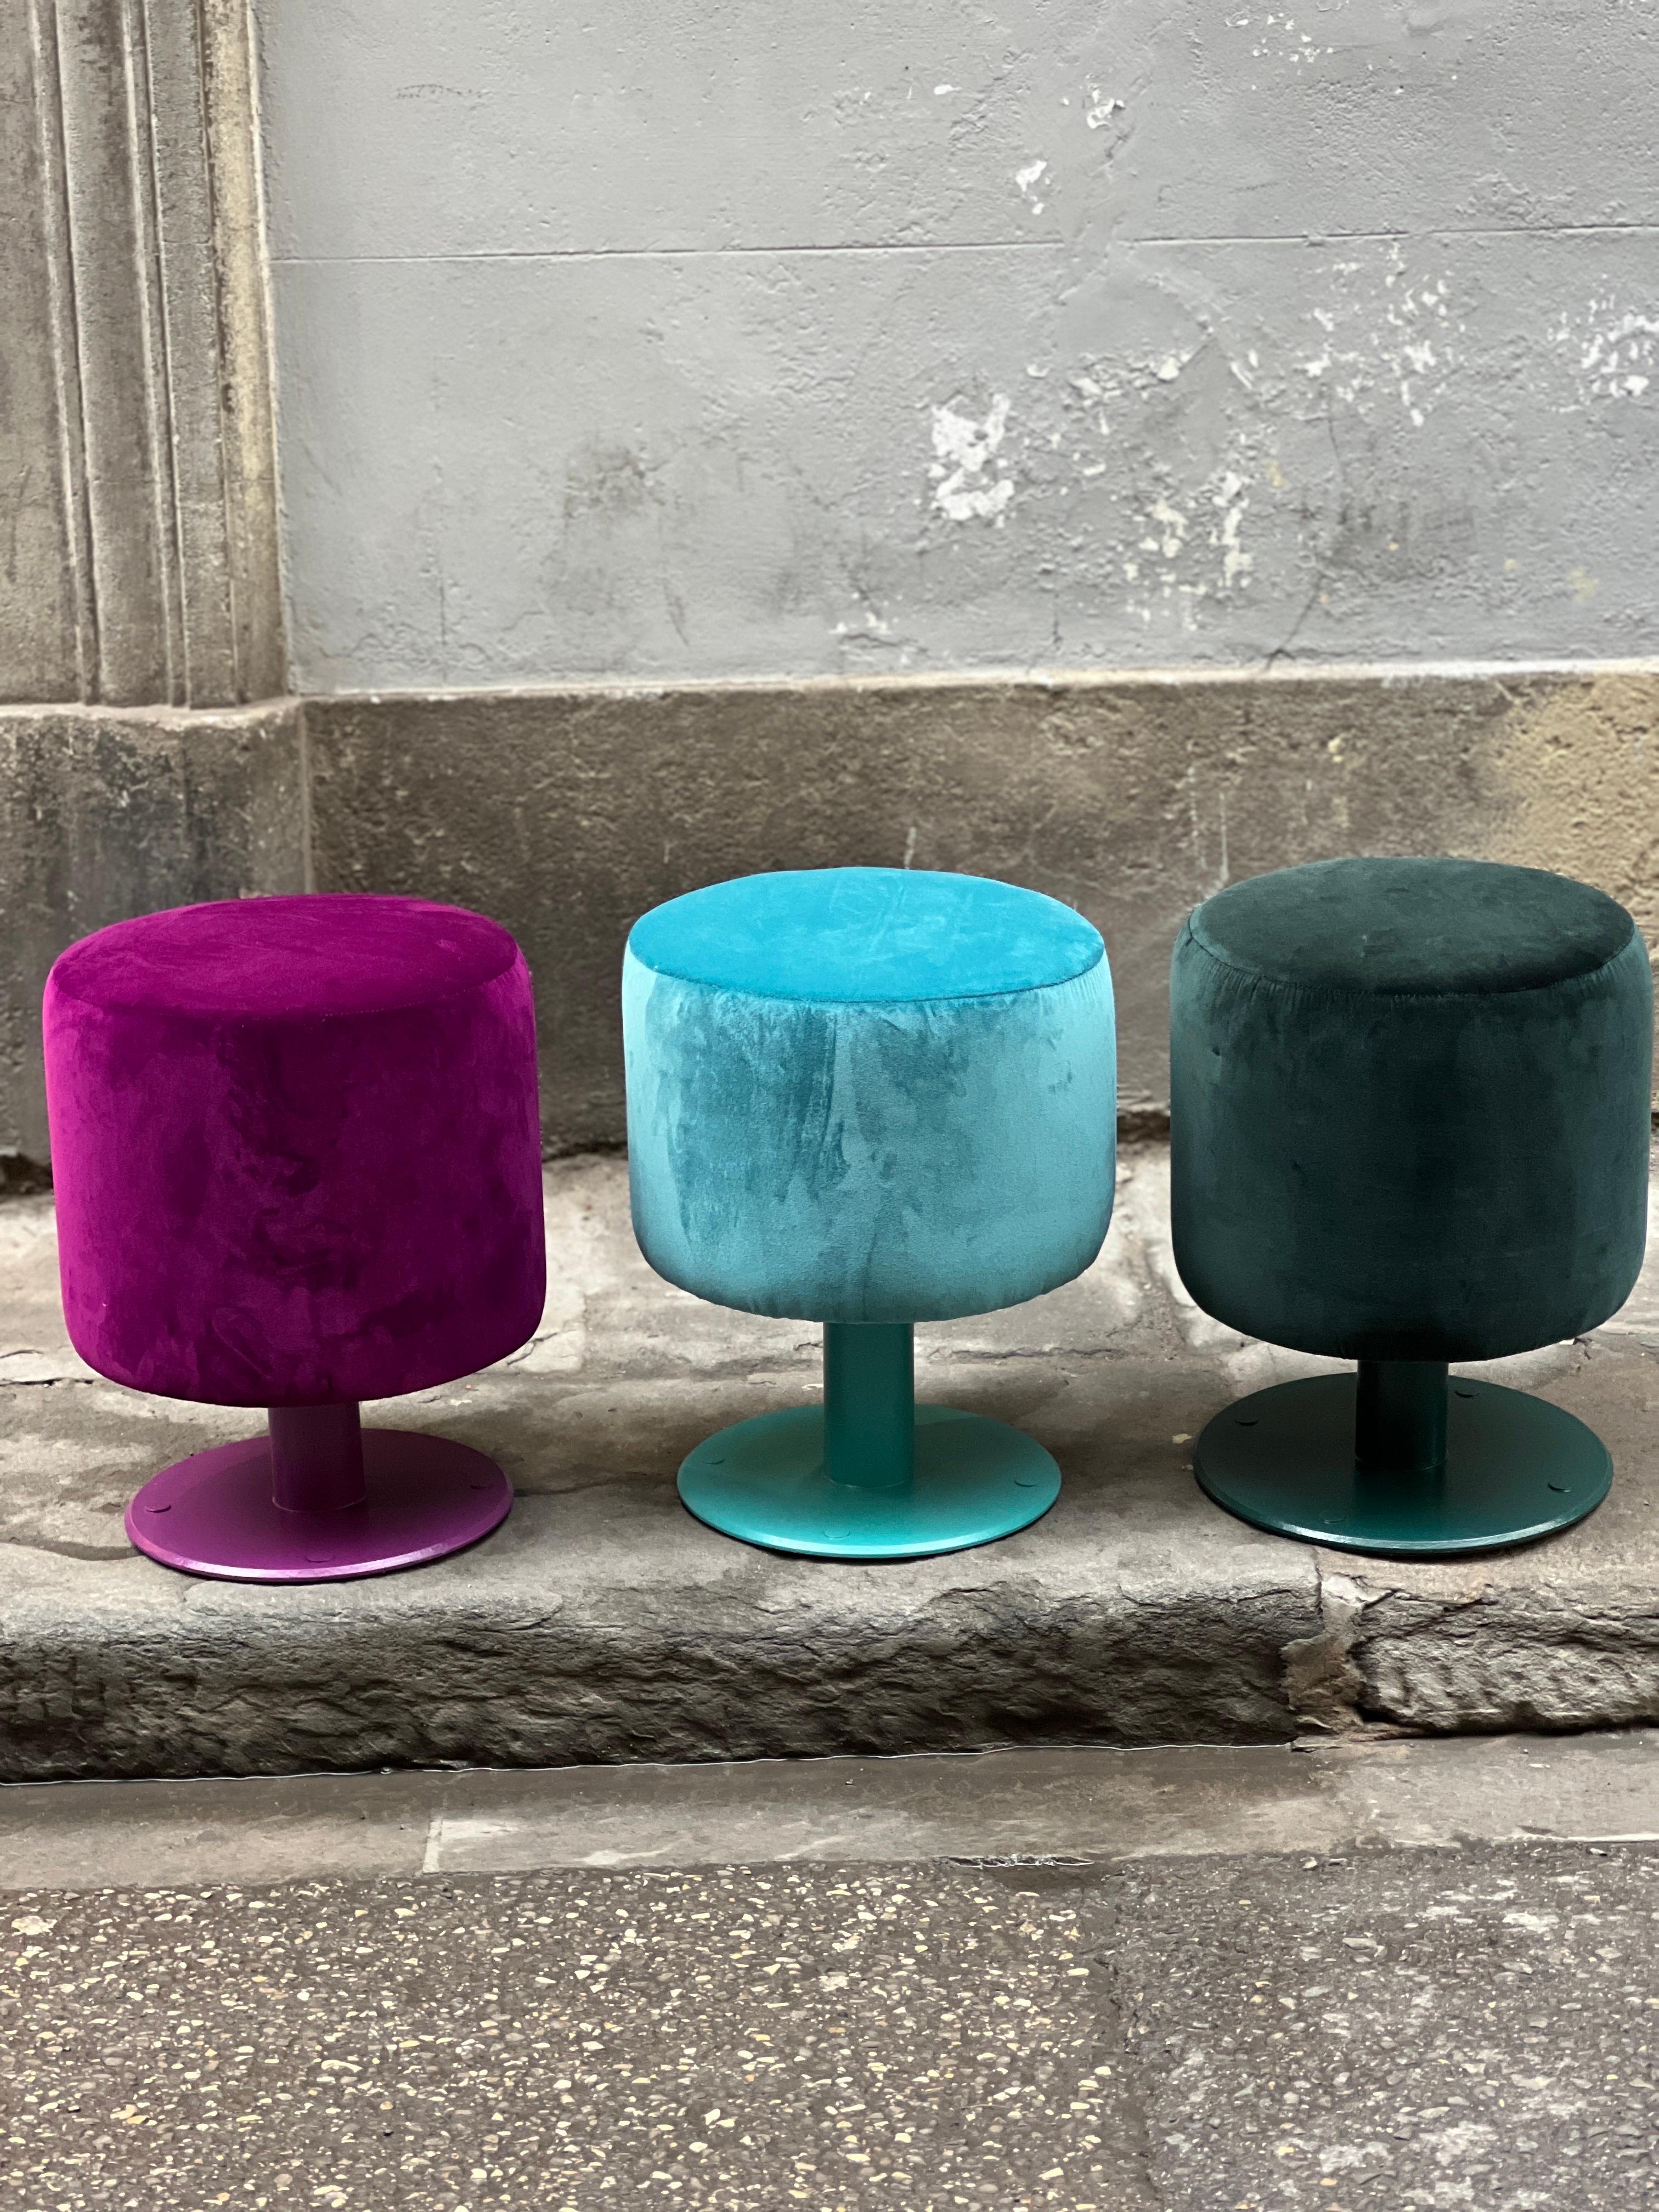 Set of 4 Vintage Poufs Newly Upholstered in Velvet in Mixed Colors (two turquoise, one cyclamen pink and one petrol green). The metal is lacquered and matching with velvet.
They come from a disused ship, in fact there were holes in the metal base to